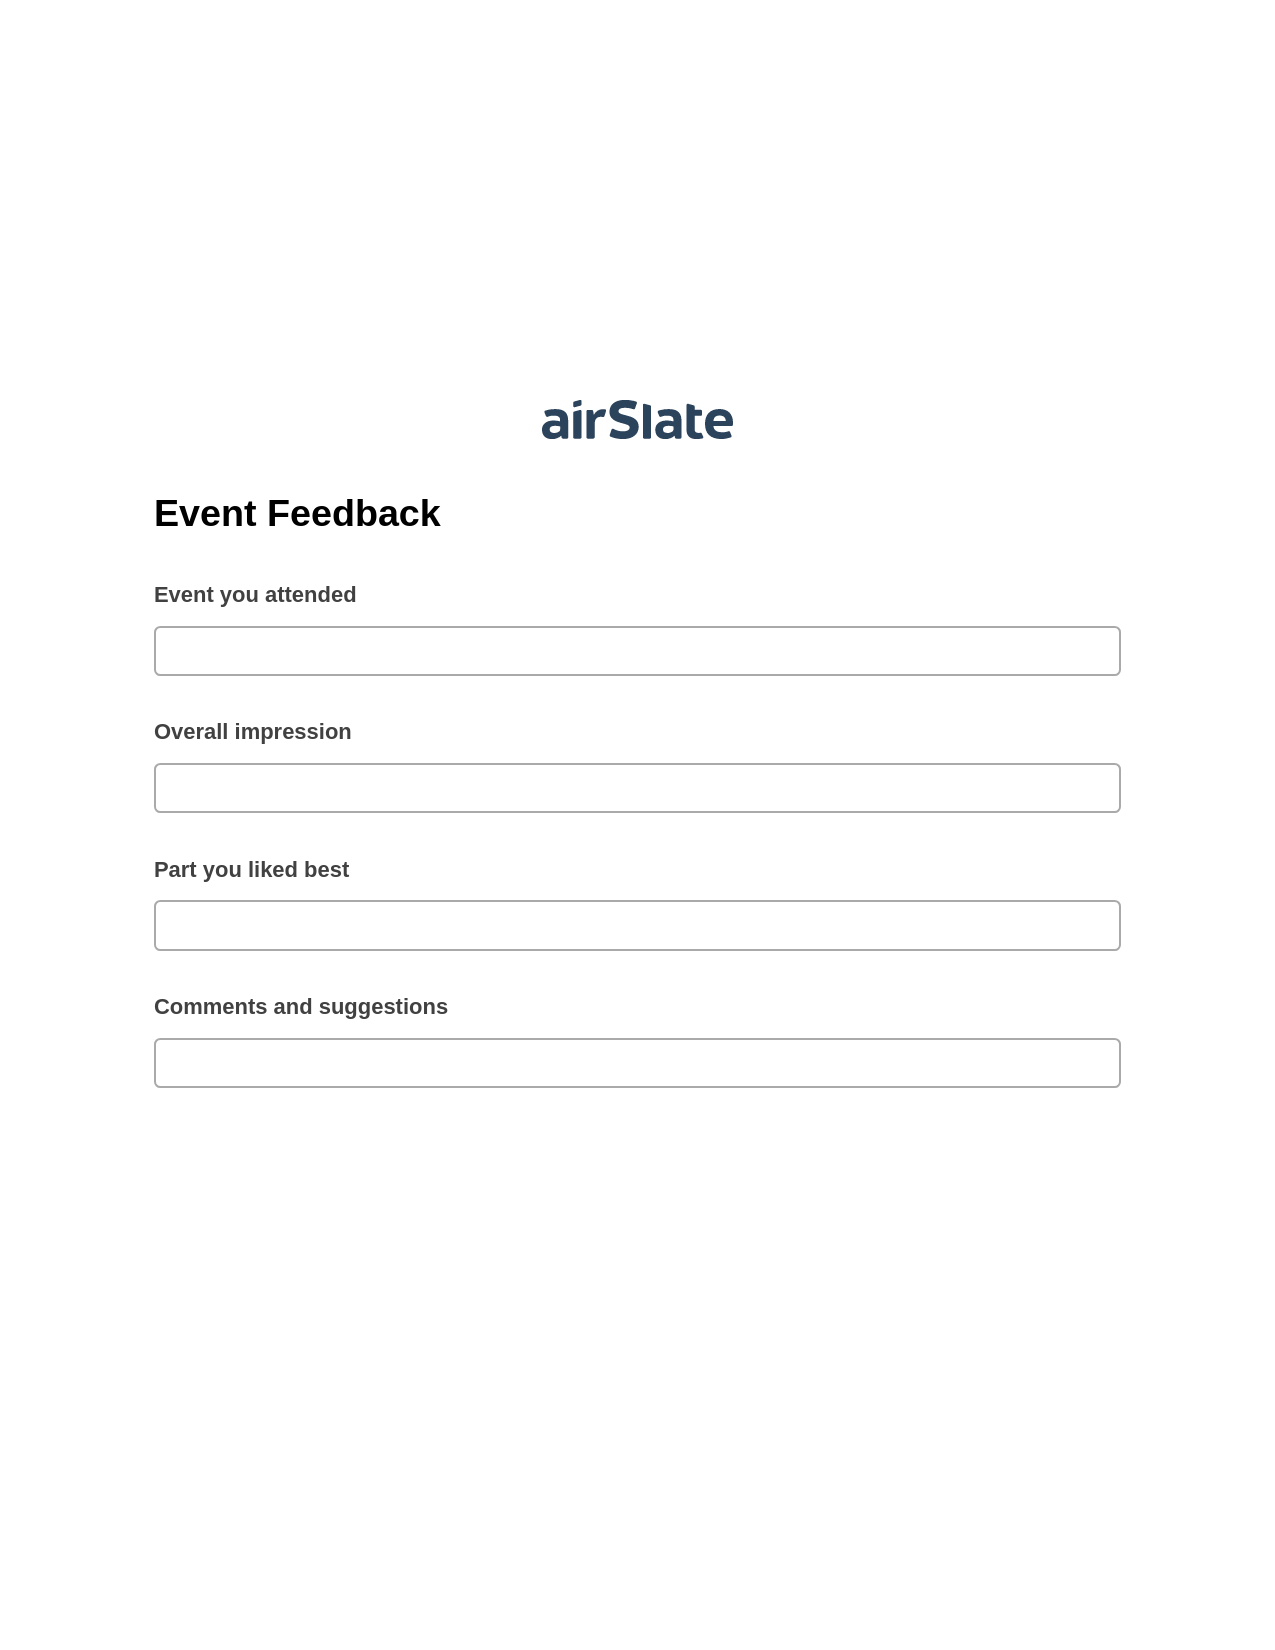 Event Feedback Pre-fill from Salesforce Record Bot, Send a Slate to MS Dynamics 365 Contact Bot, Archive to SharePoint Folder Bot